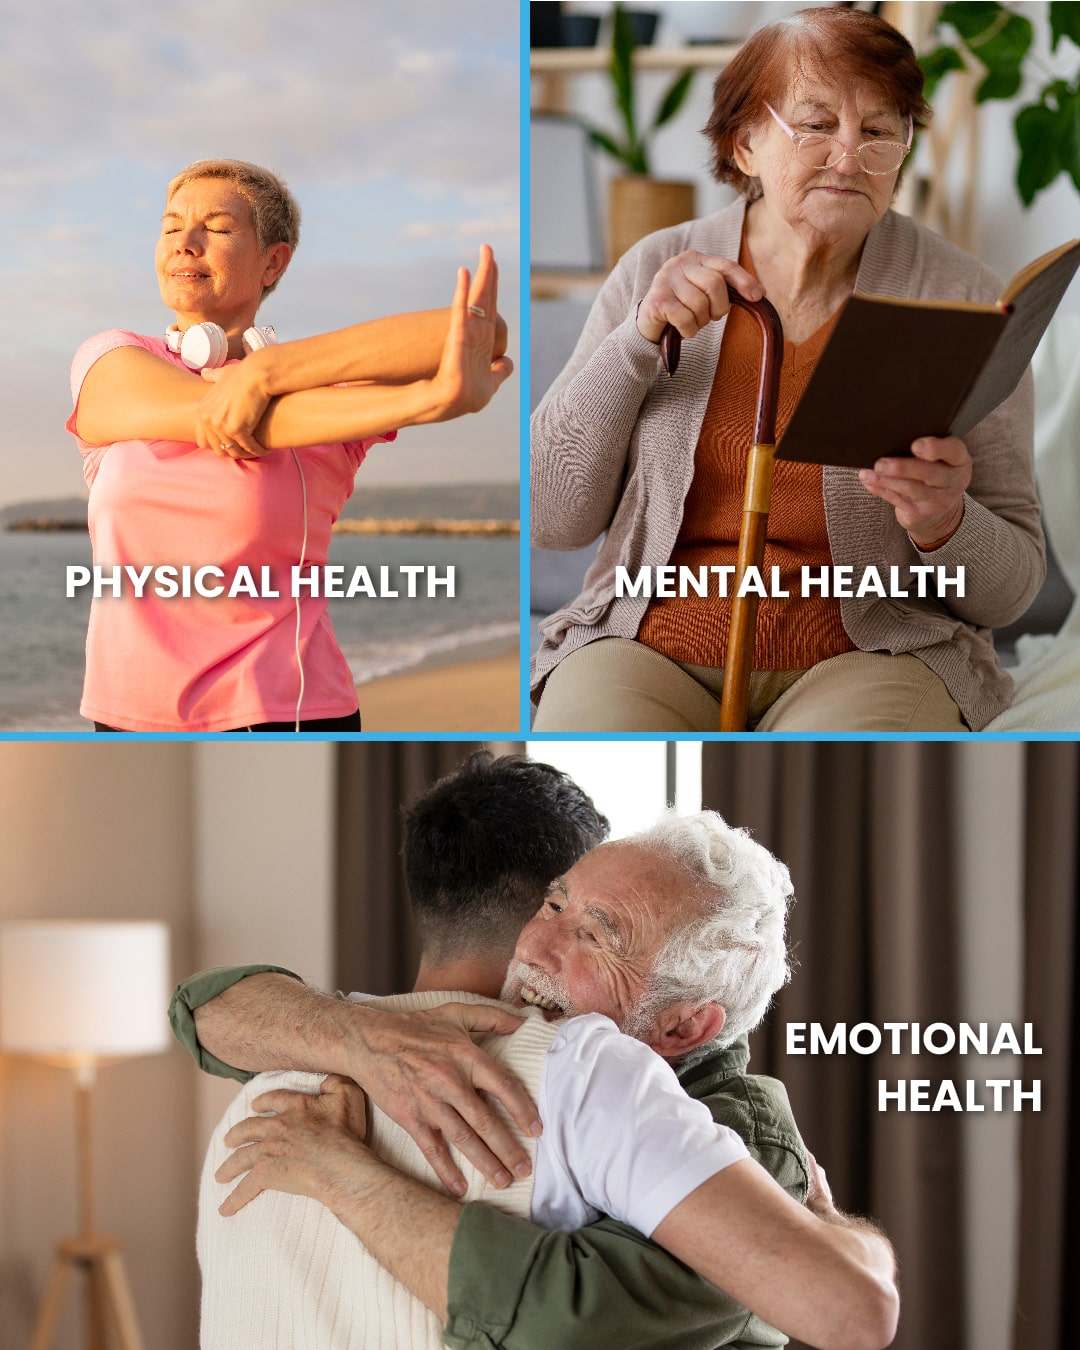 National Senior Citizens Day Composite image featuring seniors: actively exercising for 'Physical Health', engaging in cognitive activities for 'Mental Health', and sharing warm moments for 'Emotional Health'